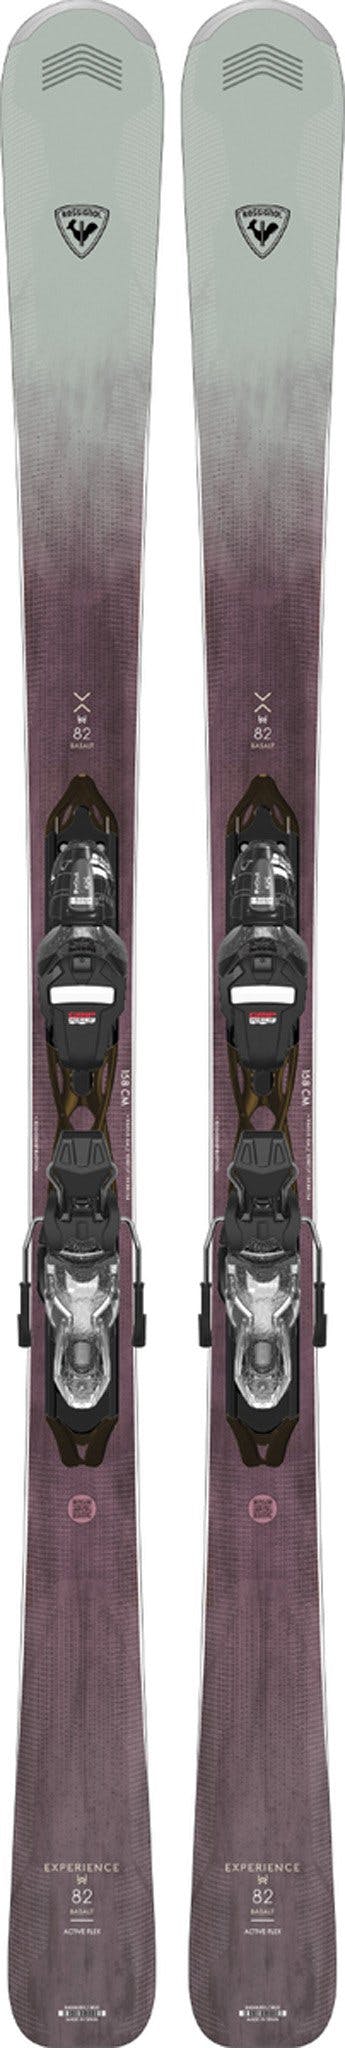 Product image for Experience W 82 Basalt Xp11 All Mountain Ski - Women's